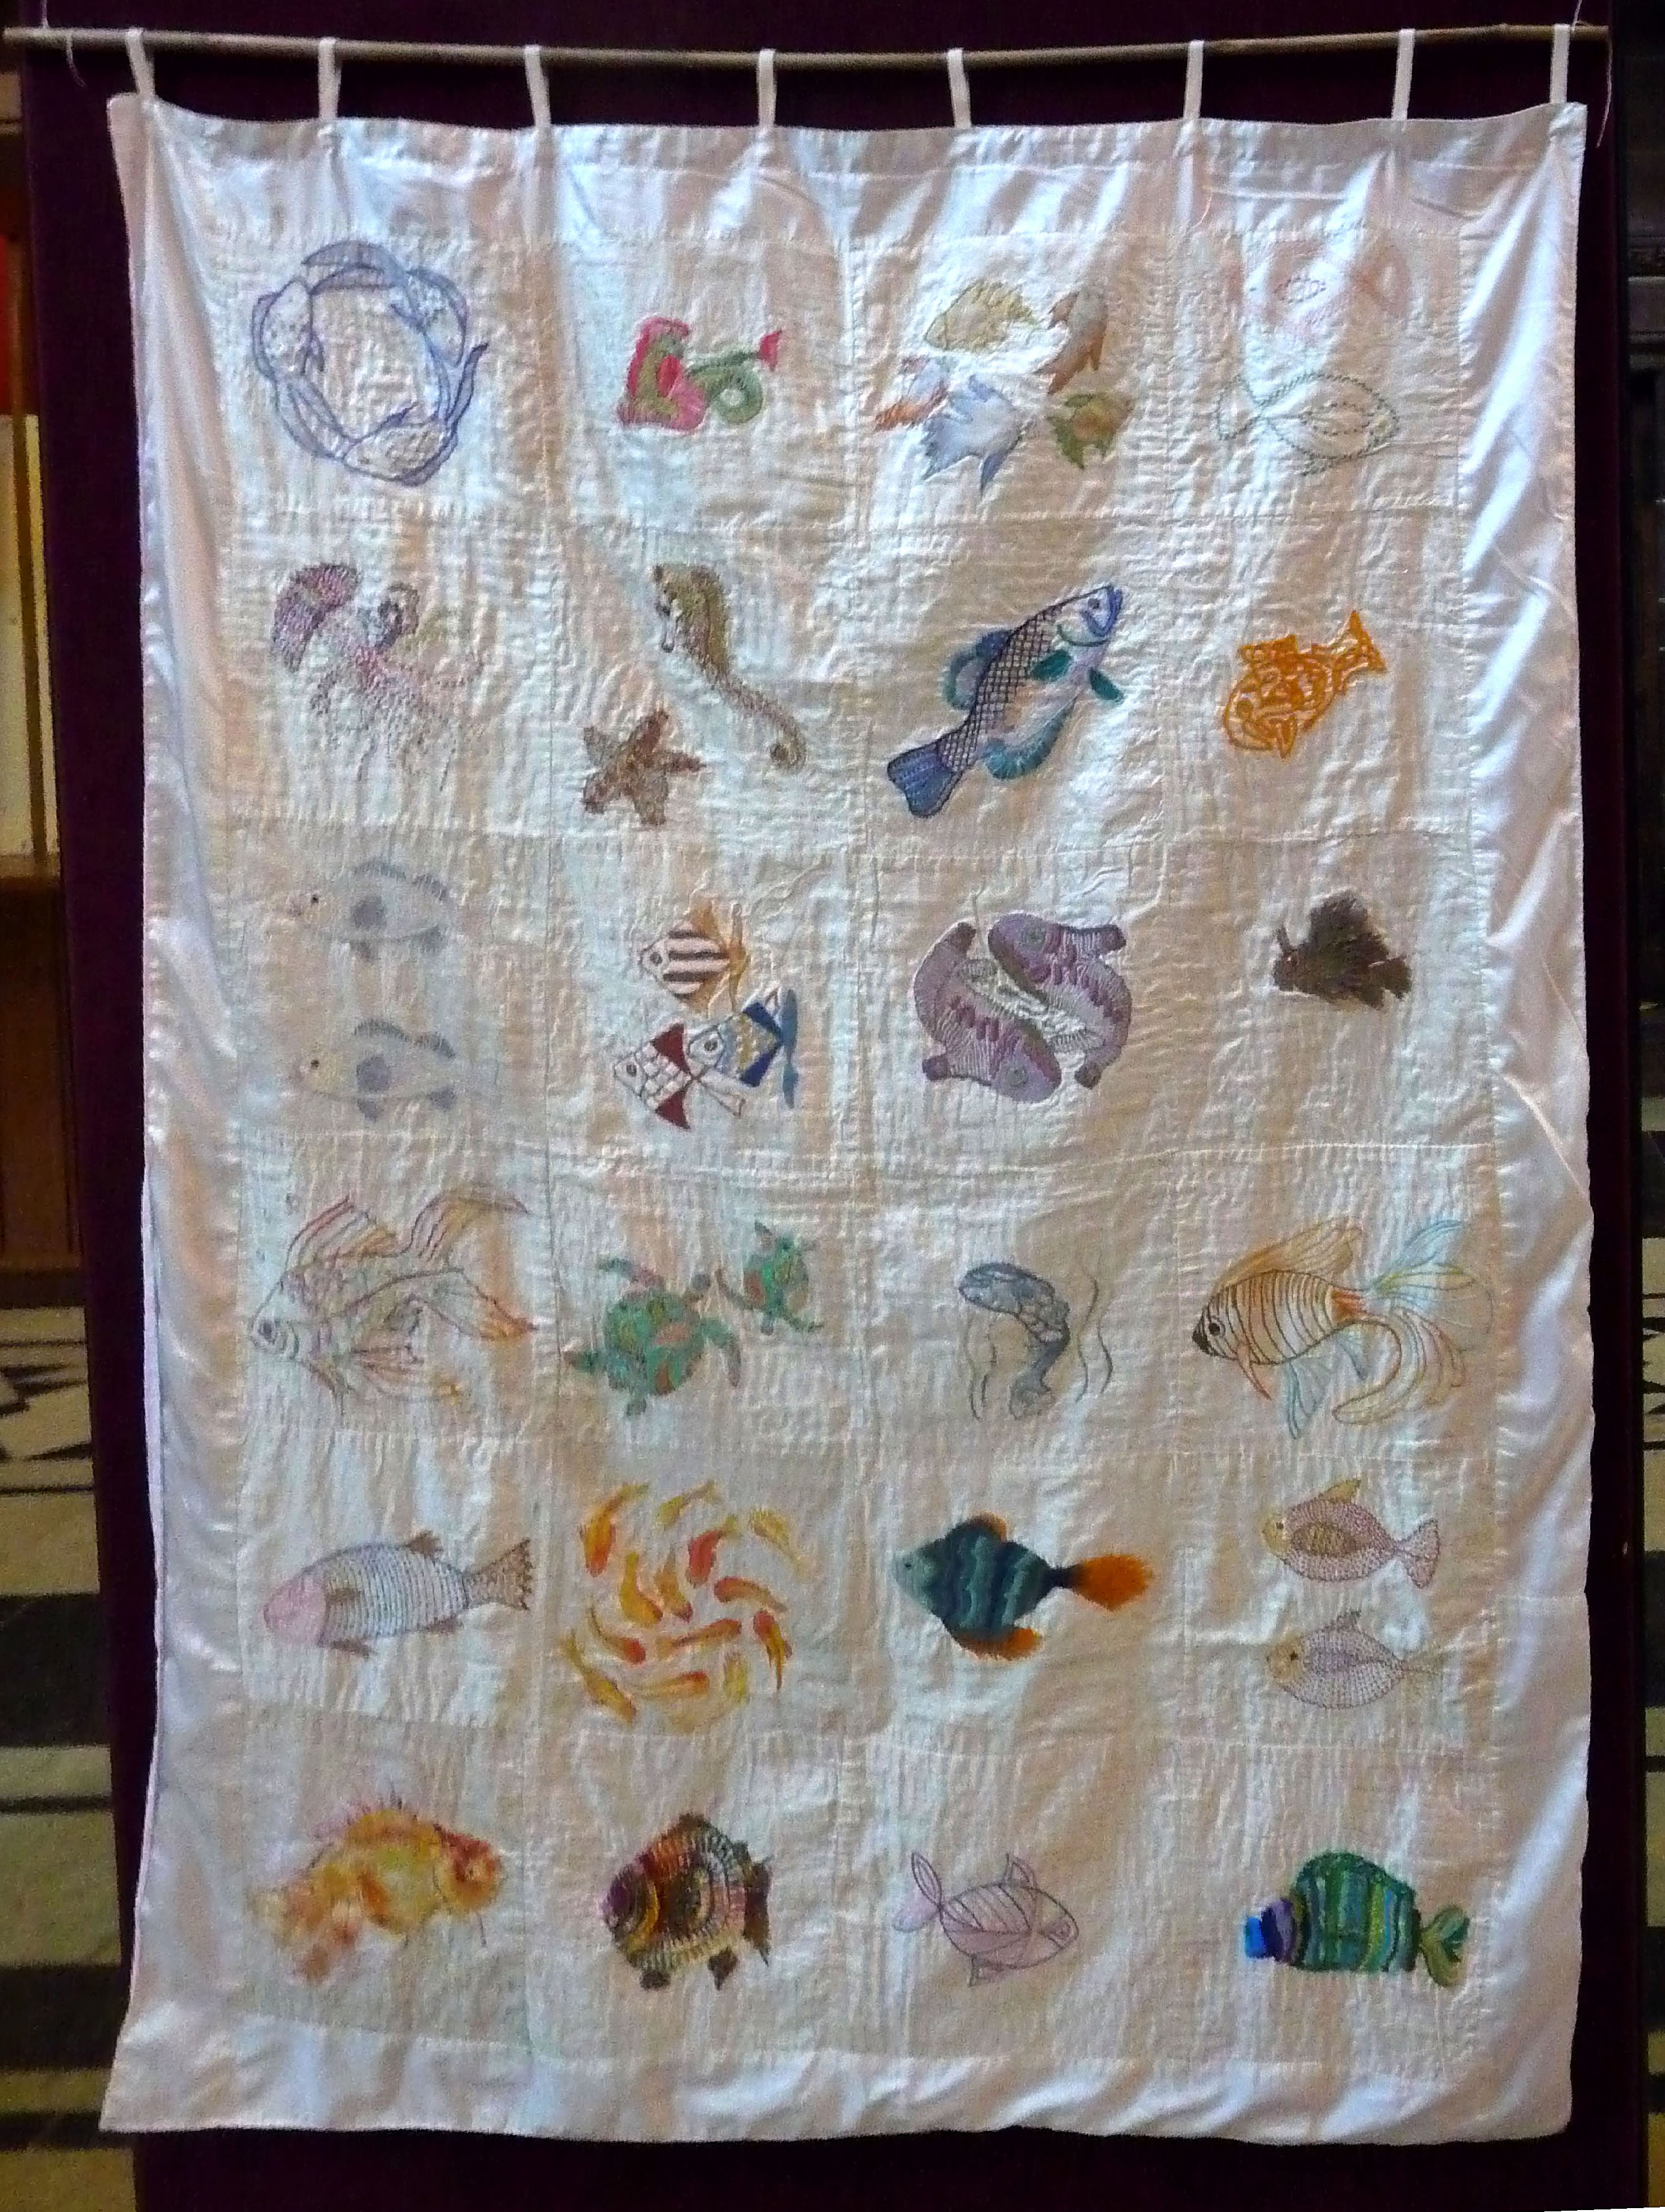 embroidery from Sreepur "Threading Dreams" exhibition, March 2015